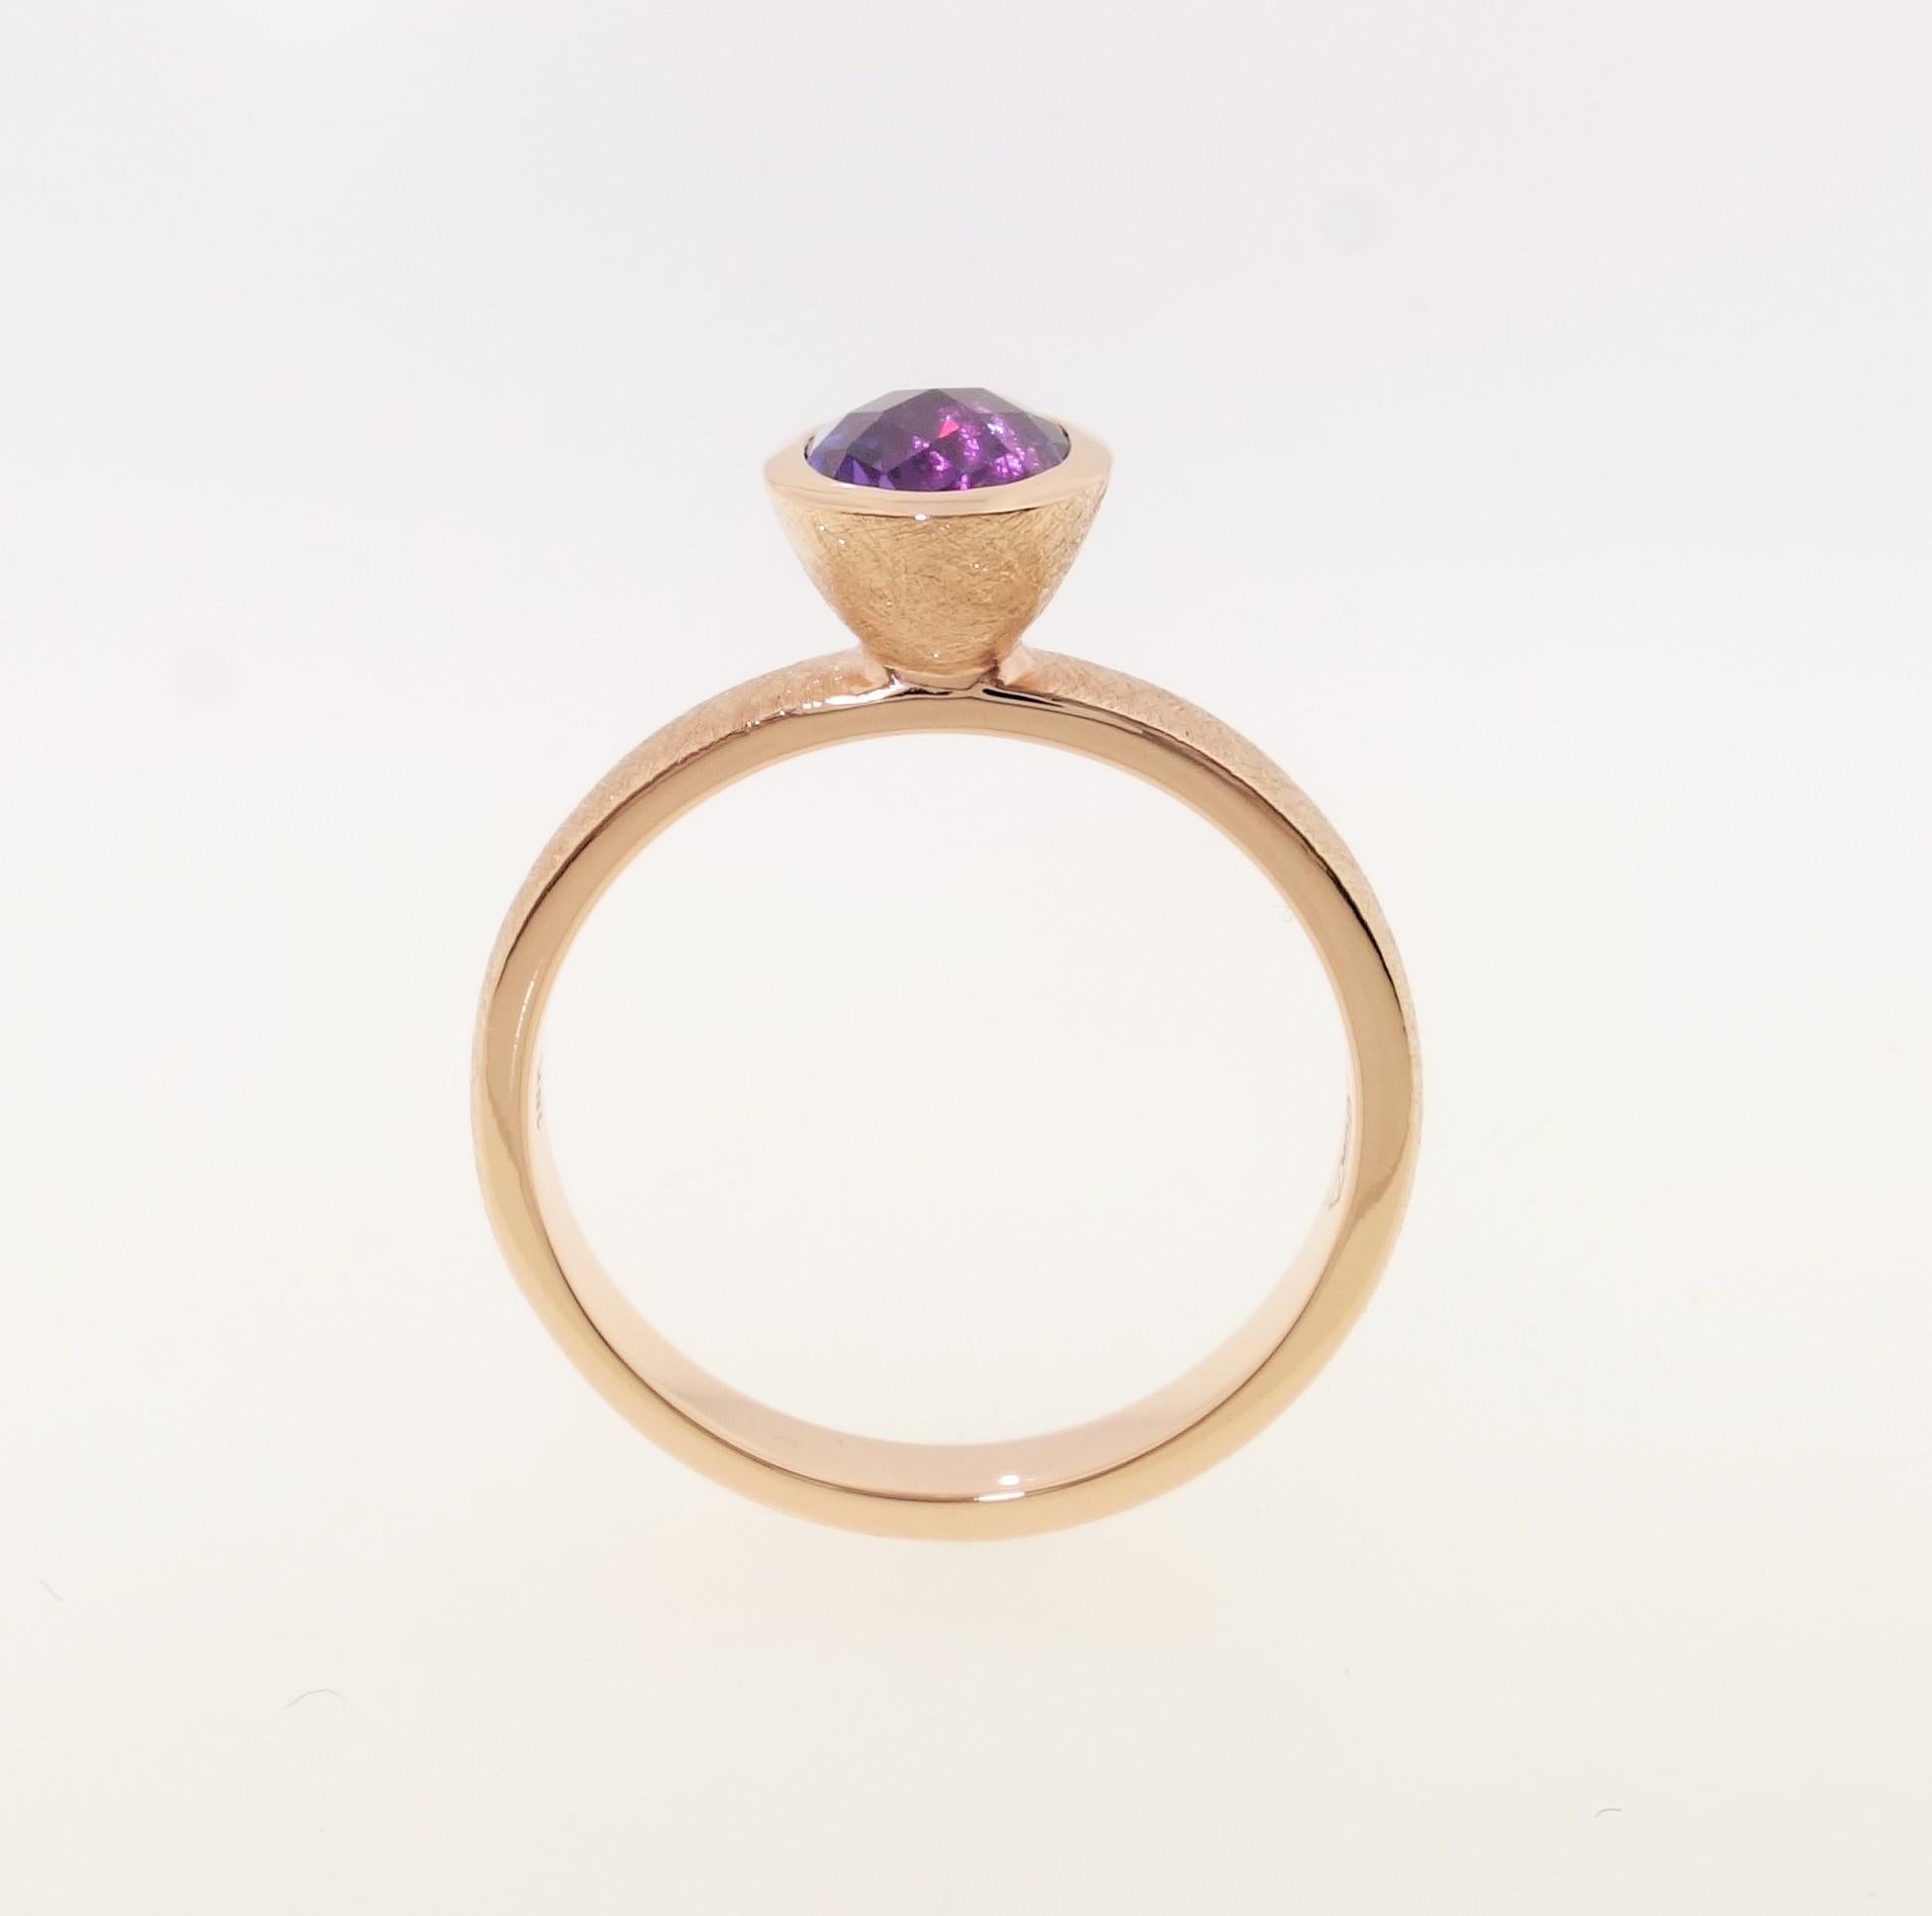 Simply Beautiful, Elegant and finely detailed Stacking Ring, set with an oval Purple Sapphire, weighing approx. 1.56 Carats and measuring 7.4mm x 5.5mm. Hand crafted and Hand Textured in 18 Karat Yellow Gold. The ring epitomizes vintage charm,